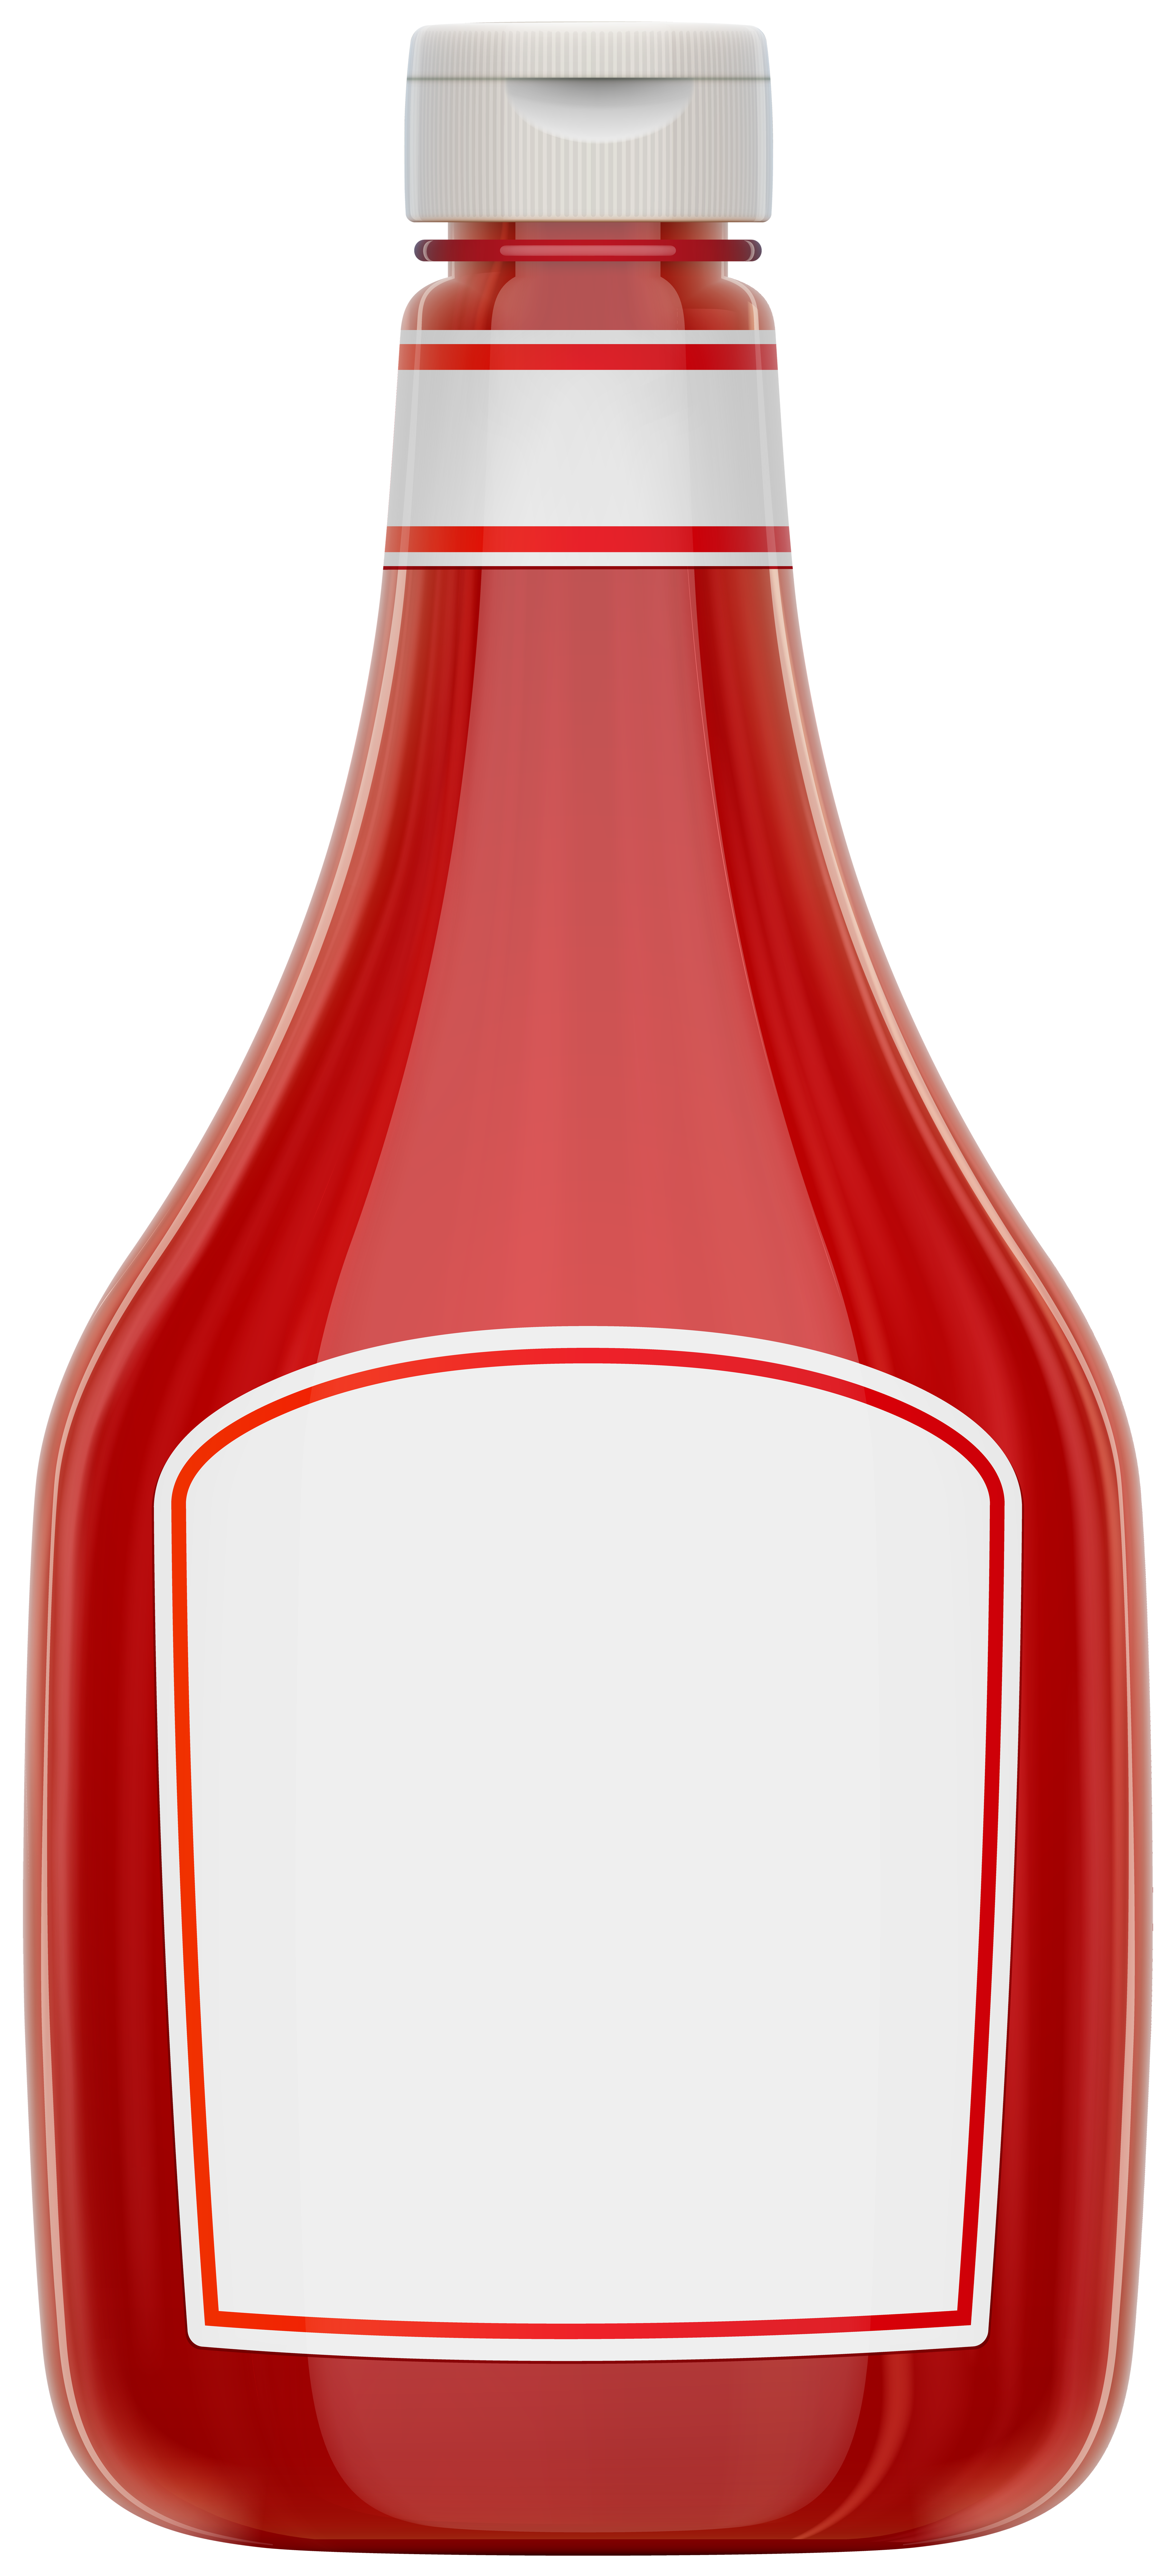 ketchup clipart transparent background